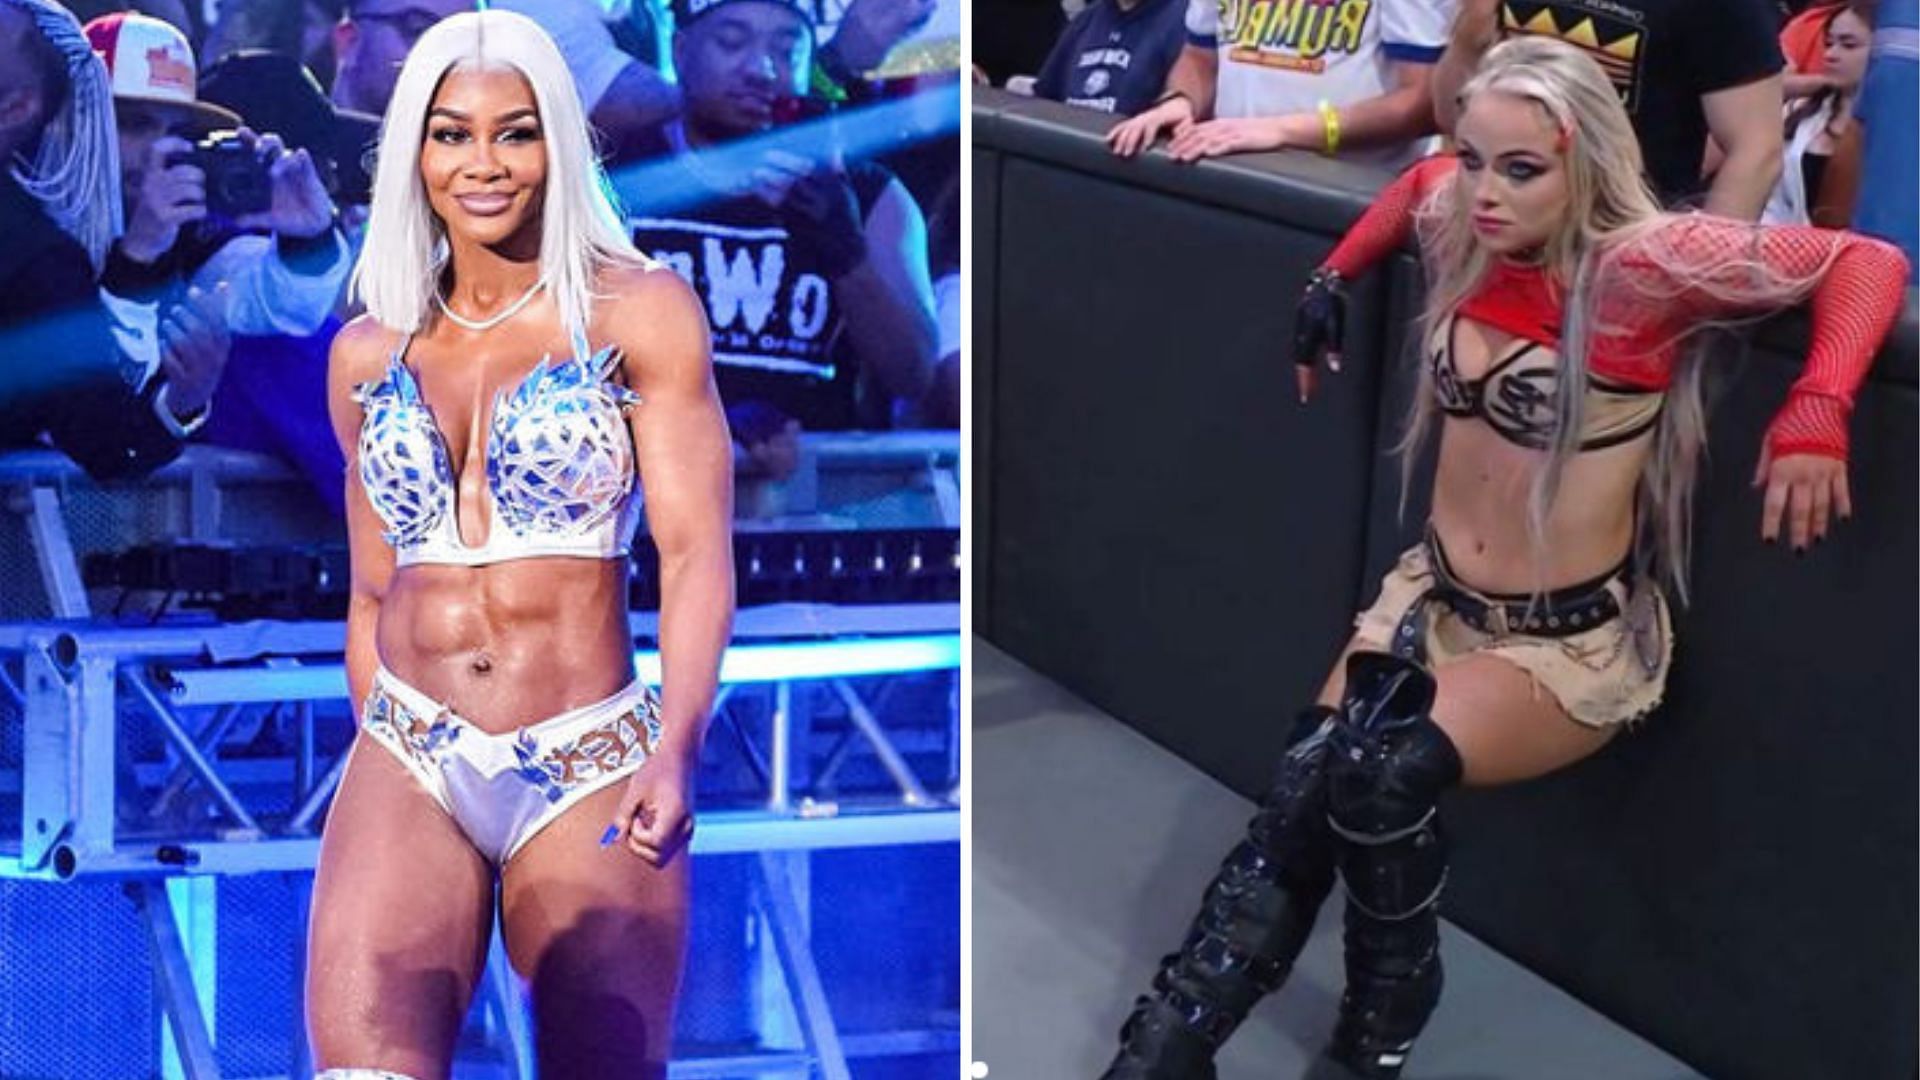 Jade Cargill on the left and Liv Morgan on the right (Image credits: WWE.com and star